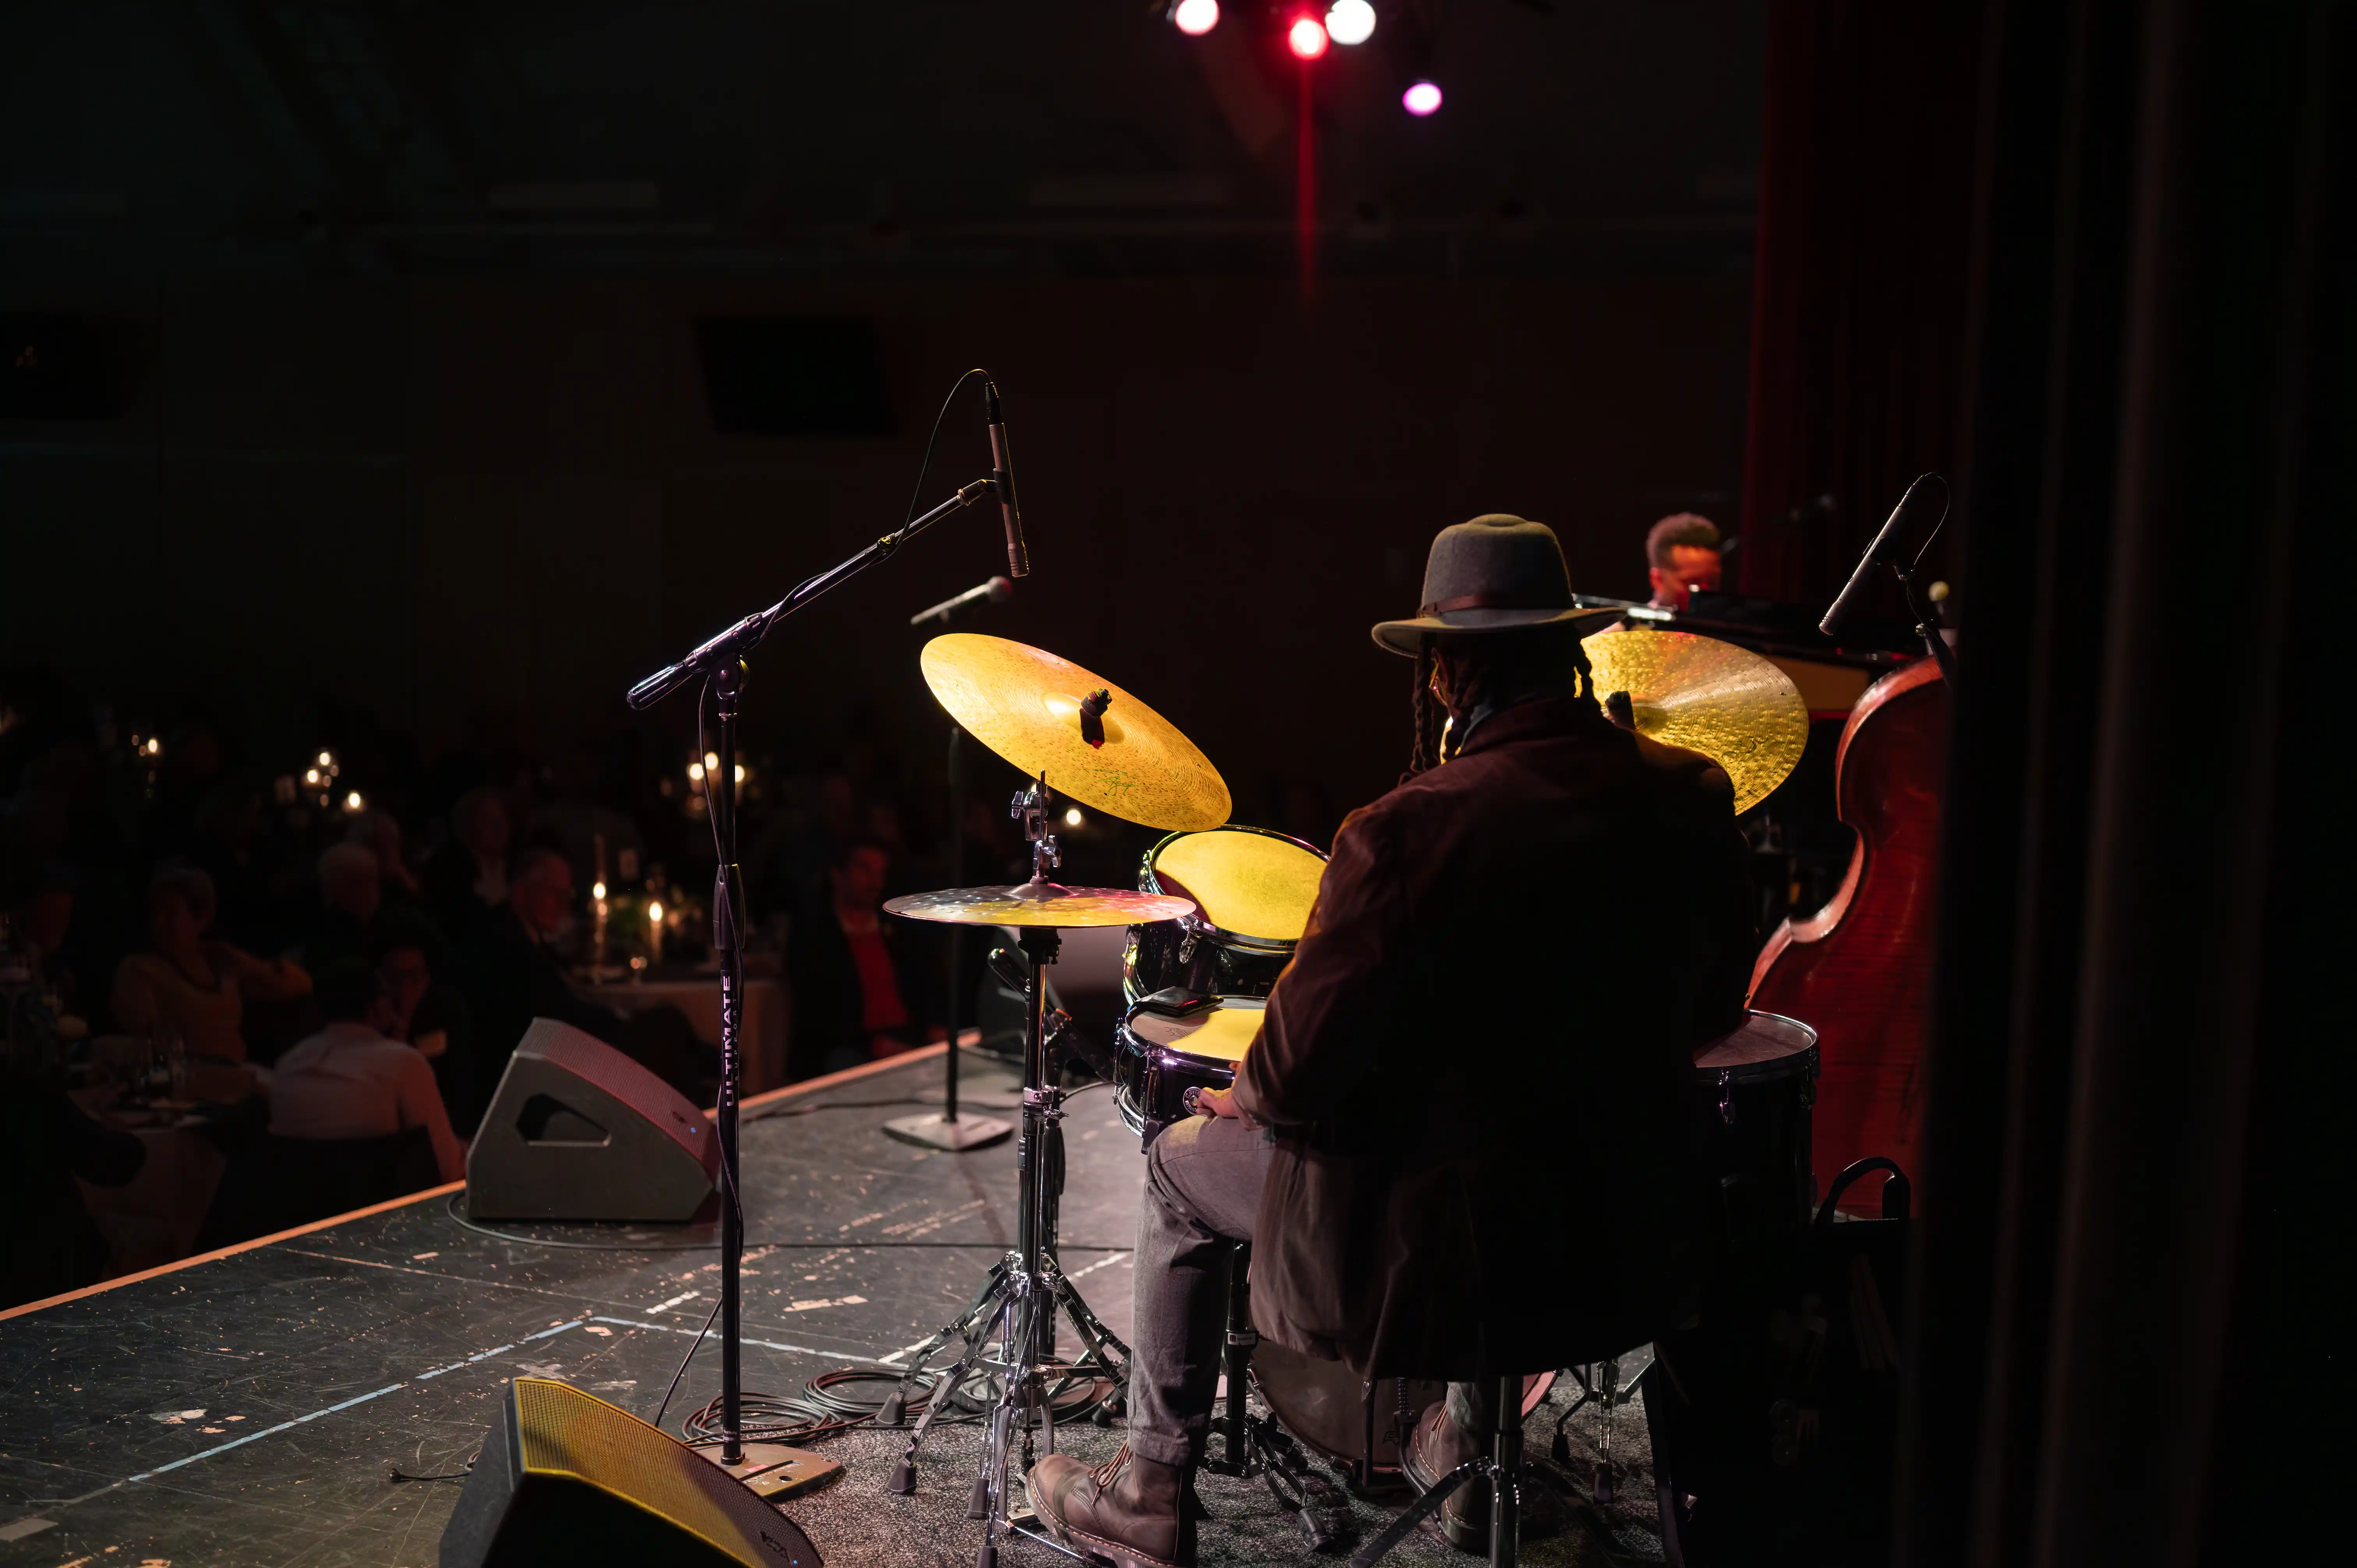 Jazz musicians performing on stage, drummer in focus, with a double bass player in the background under red stage lights.